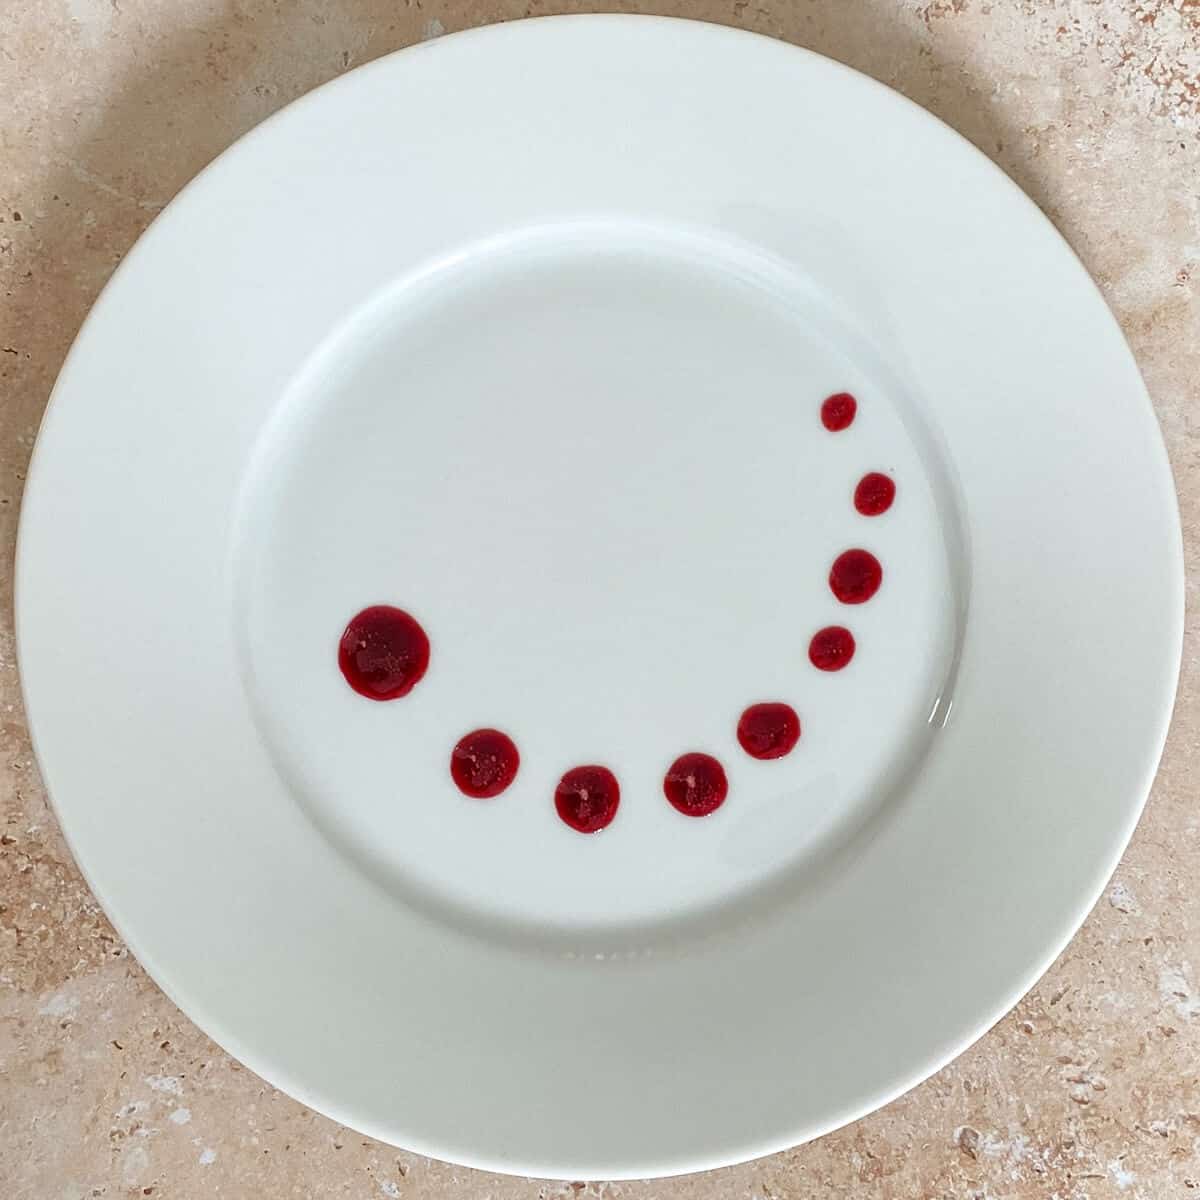 A plate with spots of sauce on it, showing a plating technique for sauce 